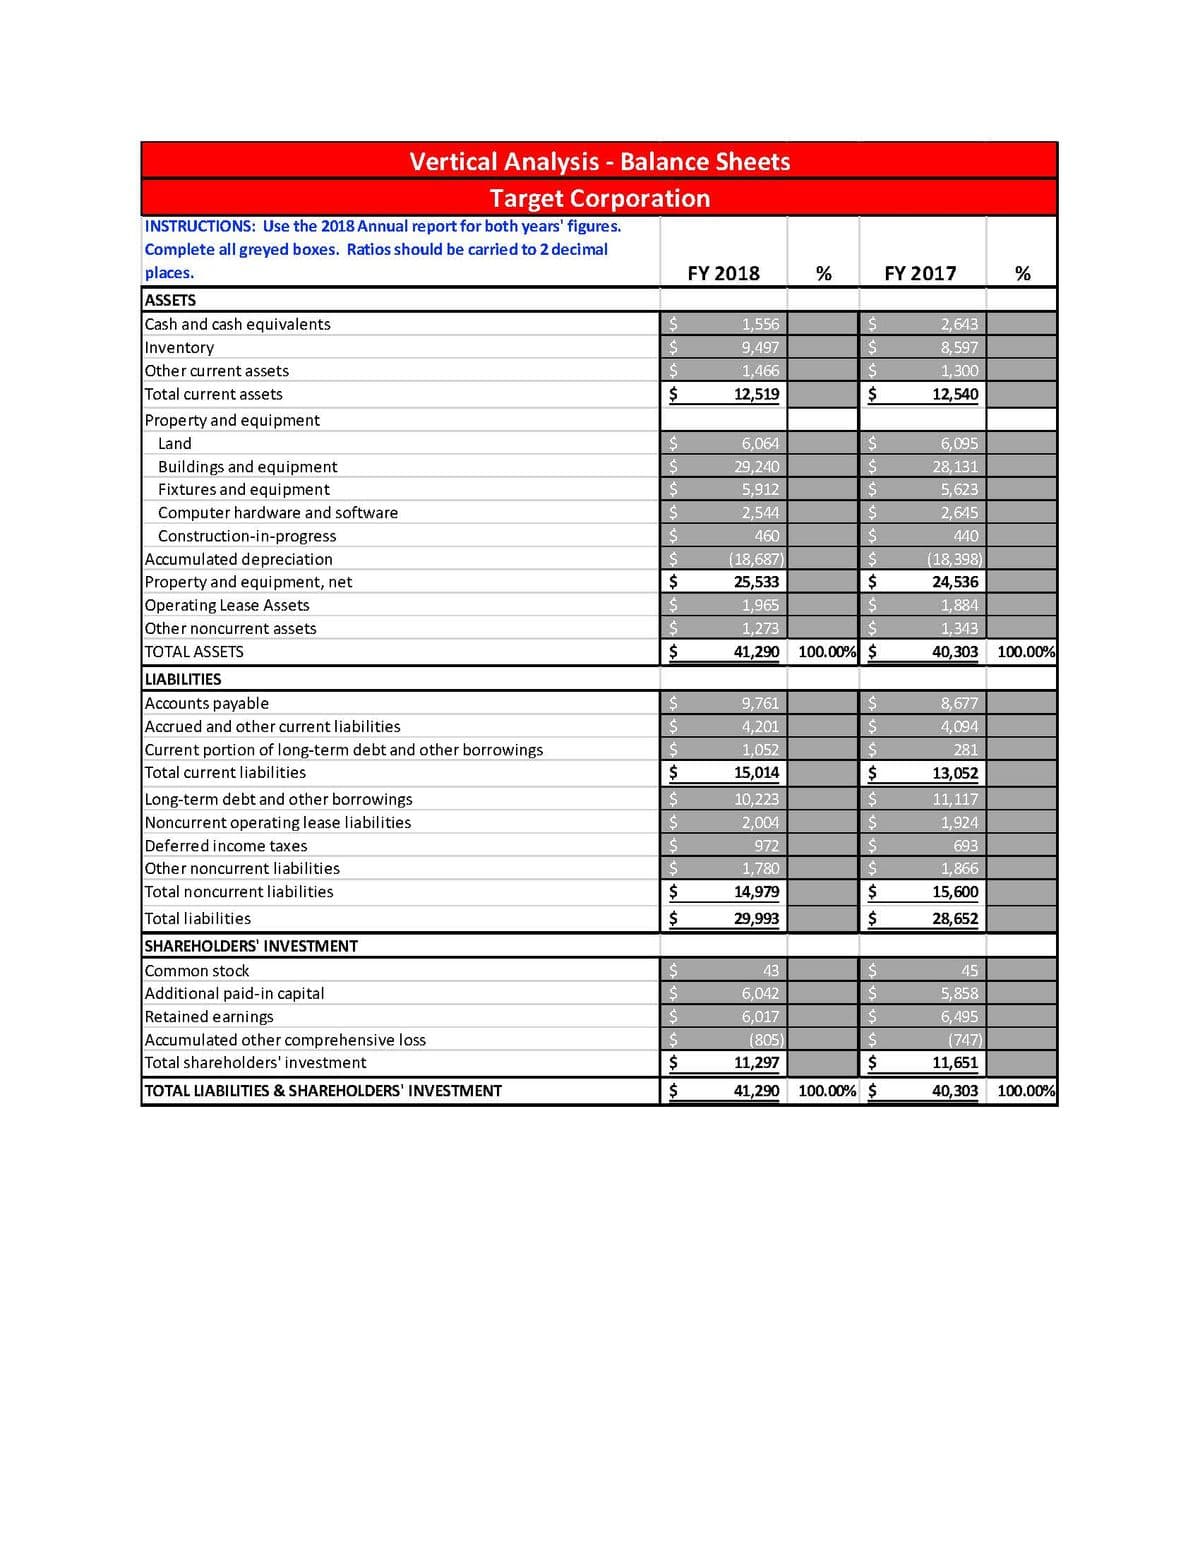 Vertical Analysis - Balance Sheets
Target Corporation
INSTRUCTIONS: Use the 2018 Annual report for both years' figures.
Complete all greyed boxes. Ratios should be carried to 2 decimal
places.
FY 2018
FY 2017
ASSETS
Cash and cash equivalents
1,556
2,643
Inventory
Other current assets
9,497
8,597
1,466
1,300
Total current assets
12,519
12,540
Property and equipment
Land
6,064
6,095
Buildings and equipment
Fixtures and equipment
29,240
28,131
5,912
5,623
Computer hardware and software
2,544
2,645
Construction-in-progress
460
440
Accumulated depreciation
Property and equipment, net
Operating Lease Assets
(18,687)
(18,398)
25,533
24
24,536
1,965
1,884
Other noncurrent assets
1,273
1,343
TOTAL ASSETS
41,290
100.00% $
40,303
100.00%
LIABILITIES
Accounts payable
Accrued and other current liabilities
9,761
8,677
4,201
4,094
Current portion of long-term debt and other borrowings
Total current liabilities
1,052
281
15,014
13,052
Long-term debt and other borrowings
Noncurrent operating lease Iliabilities
11,117
10,223
$4
2,004
1,924
Deferred income taxes
972
693
Other noncurrent liabilities
1,780
1,866
Total noncurrent liabilities
14,979
$4
15,600
Total liabilities
$4
29,993
28,652
SHAREHOLDERS' INVESTMENT
Common stock
43
45
Additional paid-in capital
Retained earnings
Accumulated other comprehensive loss
Total shareholders' investment
6,042
5,858
6,495
(747)
11,651
6,017
(805)
11,297
2$
TOTAL LIABILITIES & SHAREHOLDERS' INVESTMENT
2$
41,290
100.00% $
40,303
100.00%
